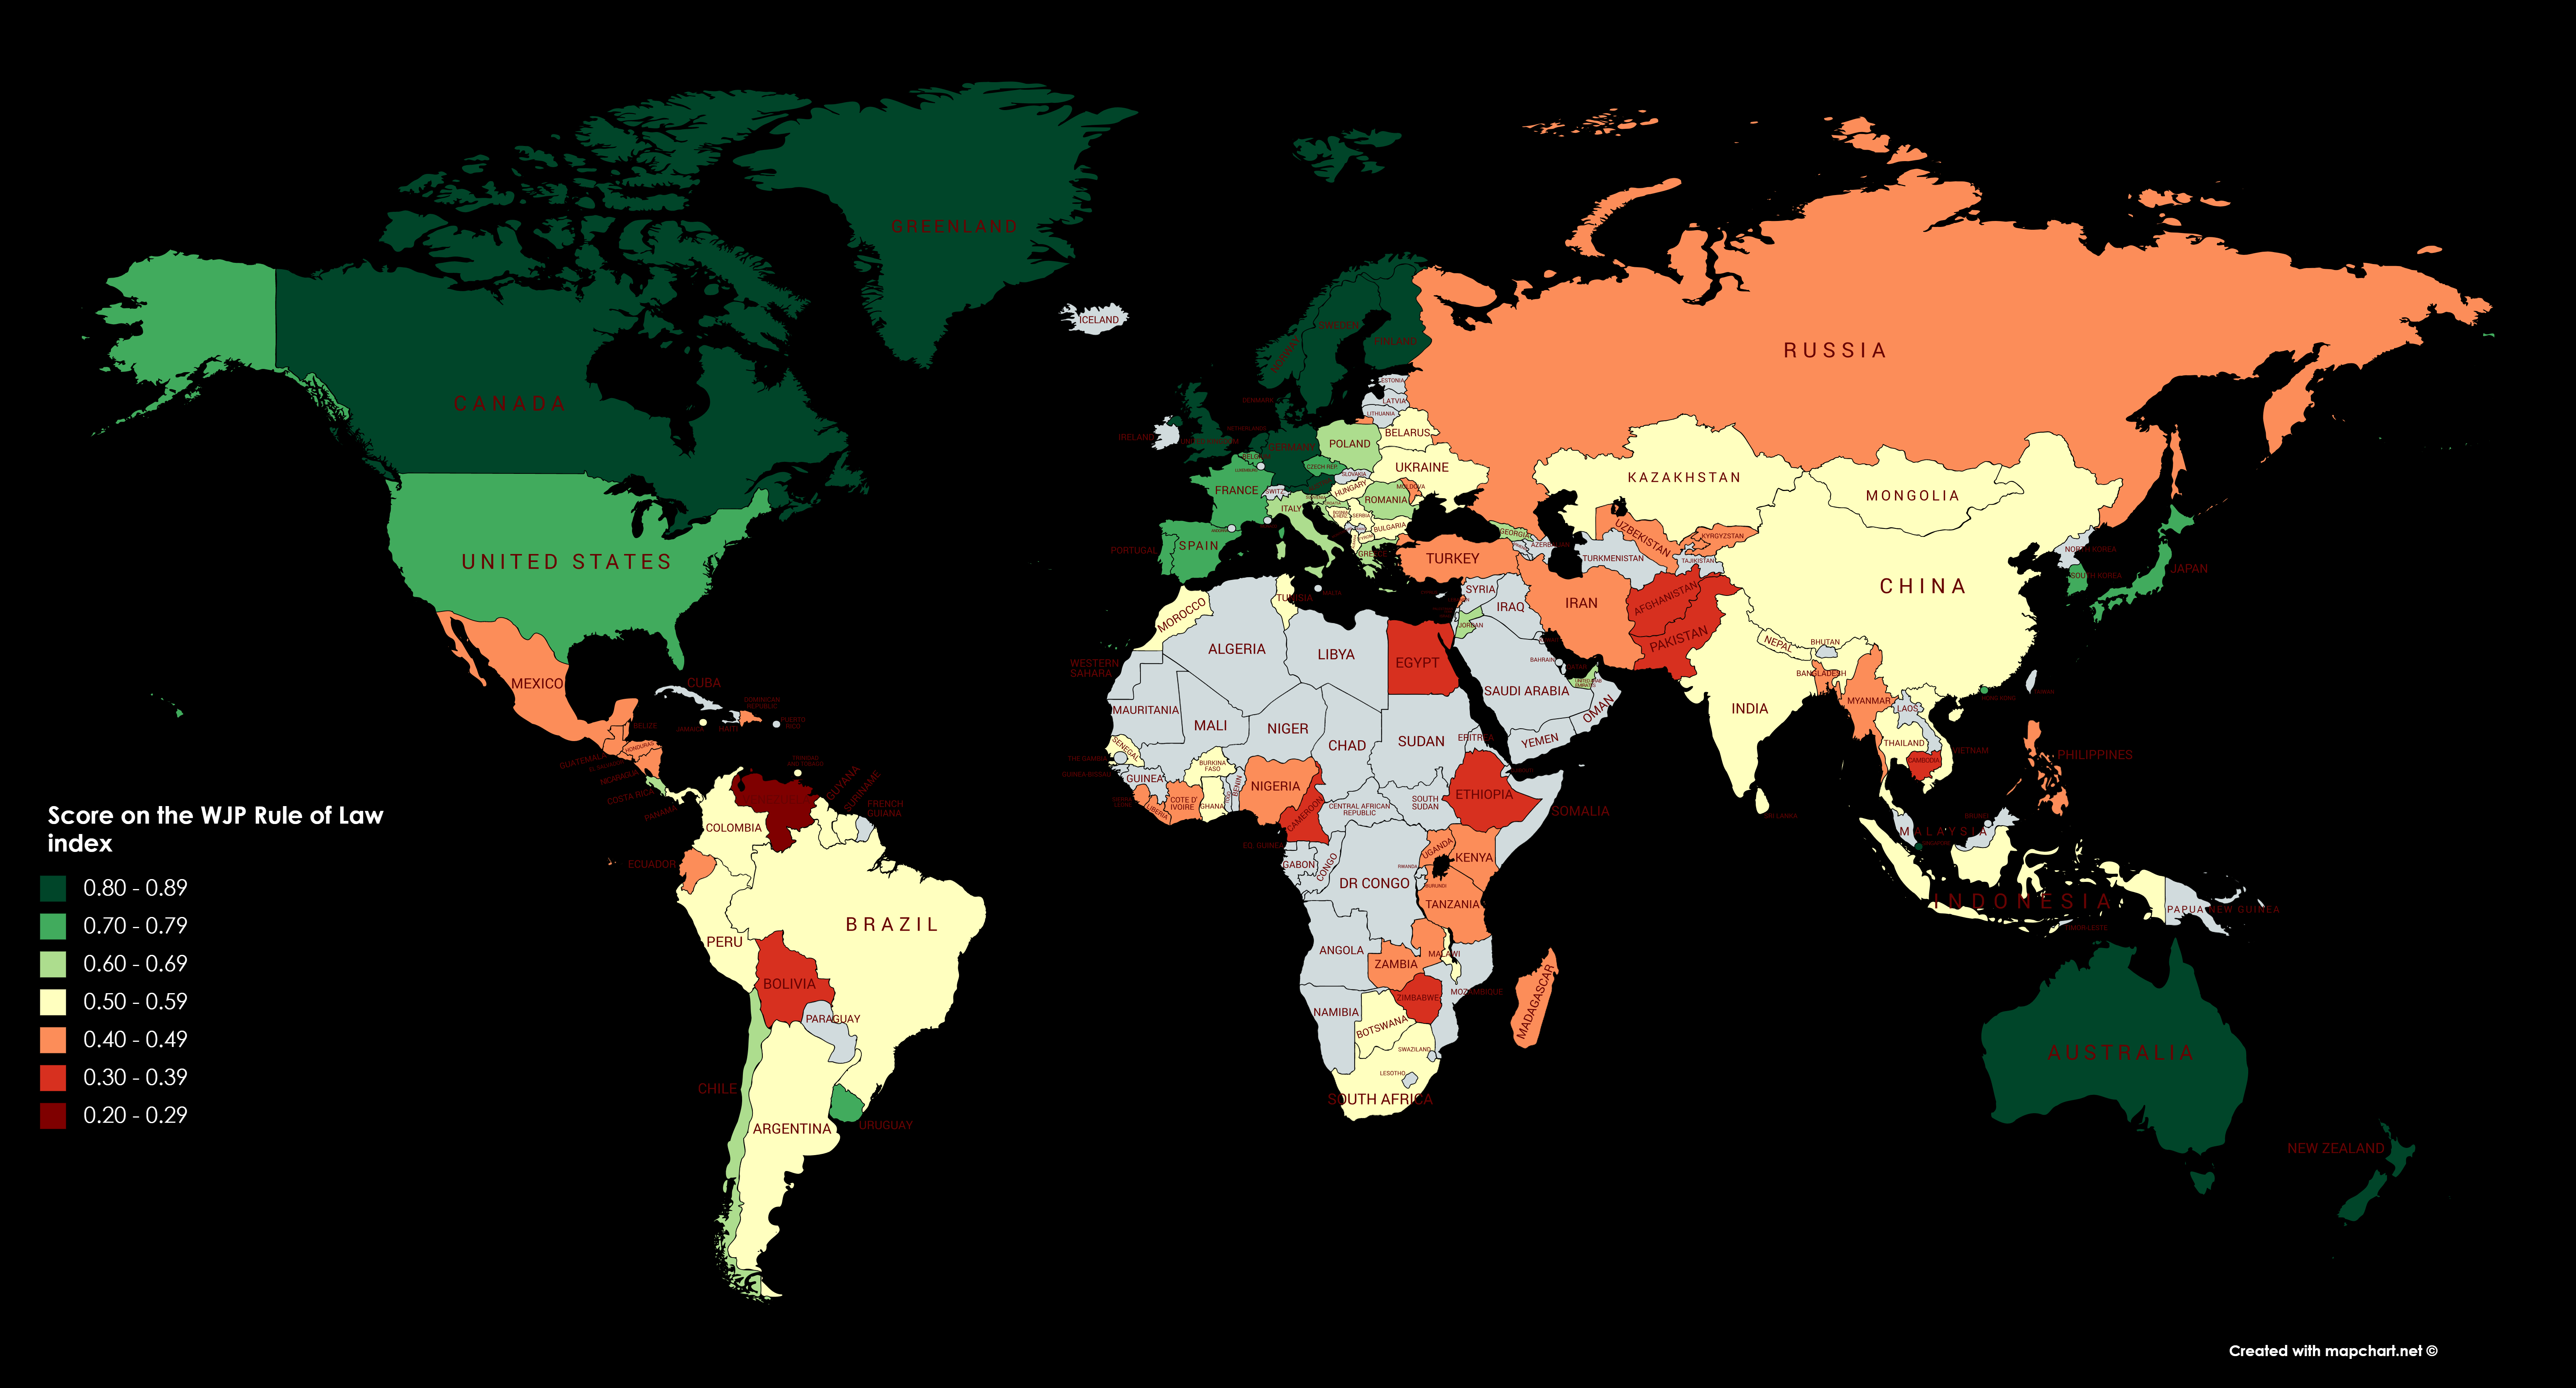 Map : Score on the WJP Rule of Law index for 2018 - Infographic.tv ...